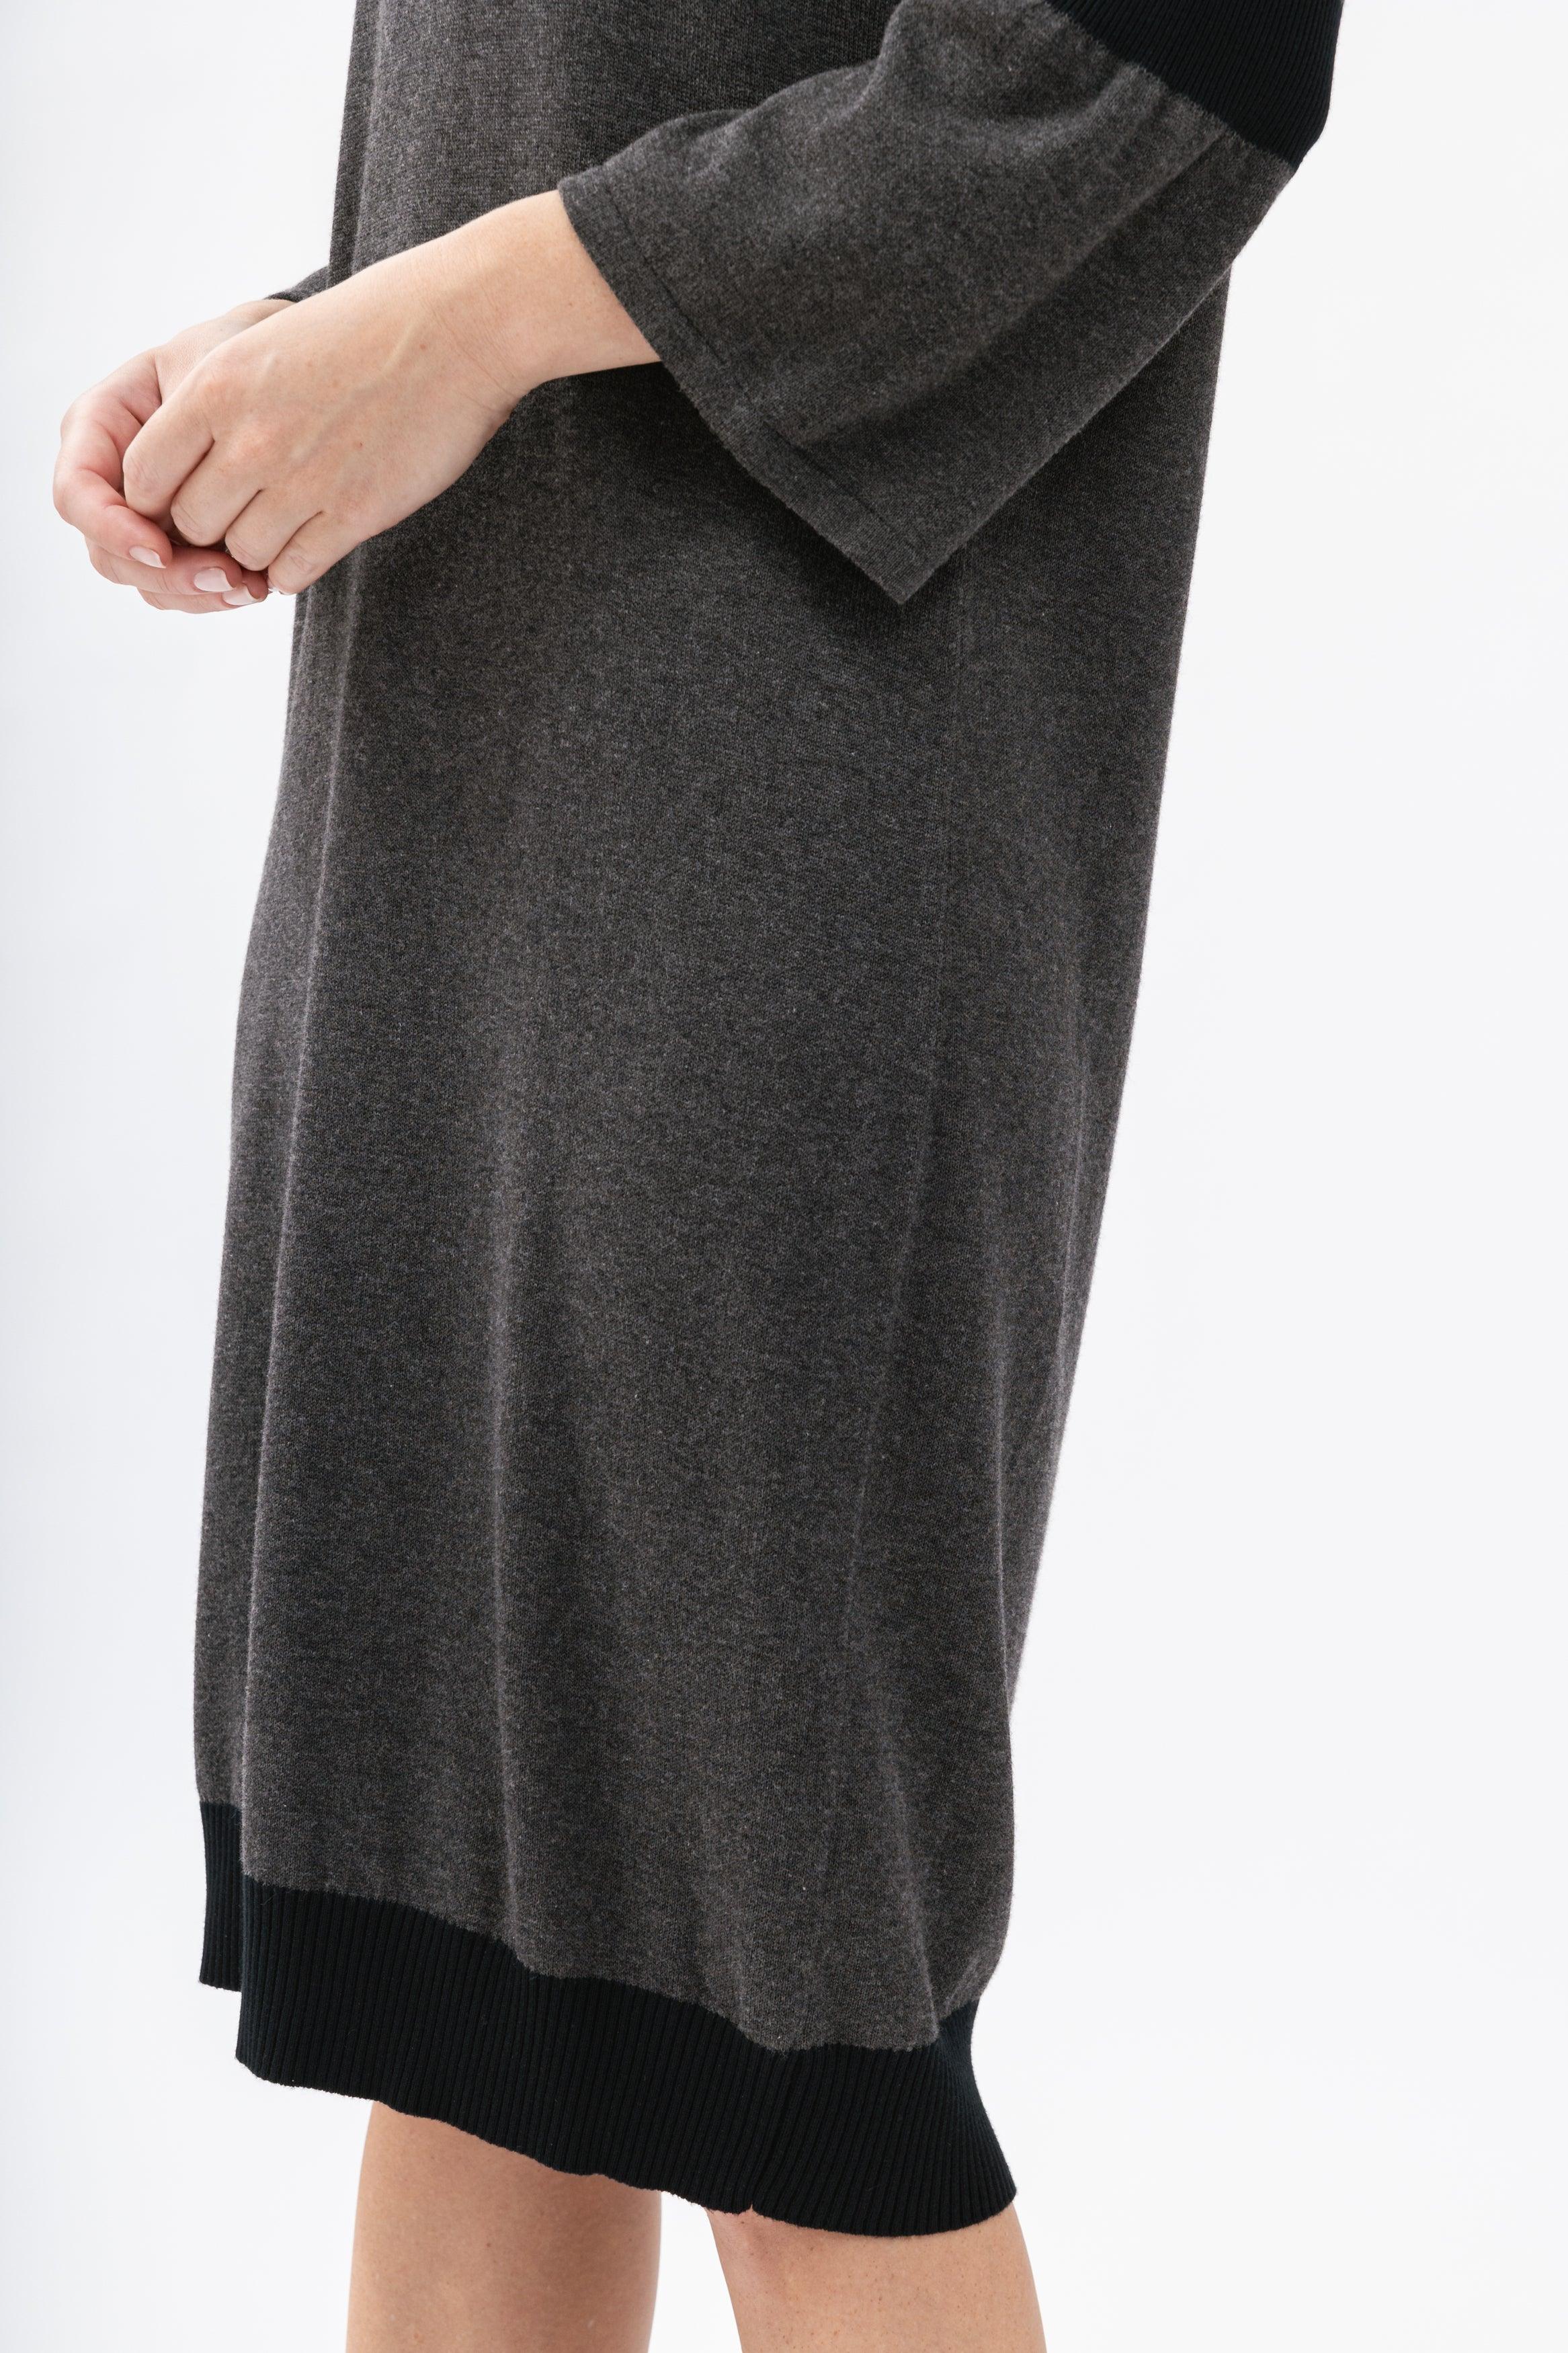 Bamboo Color Block Knitted Dress